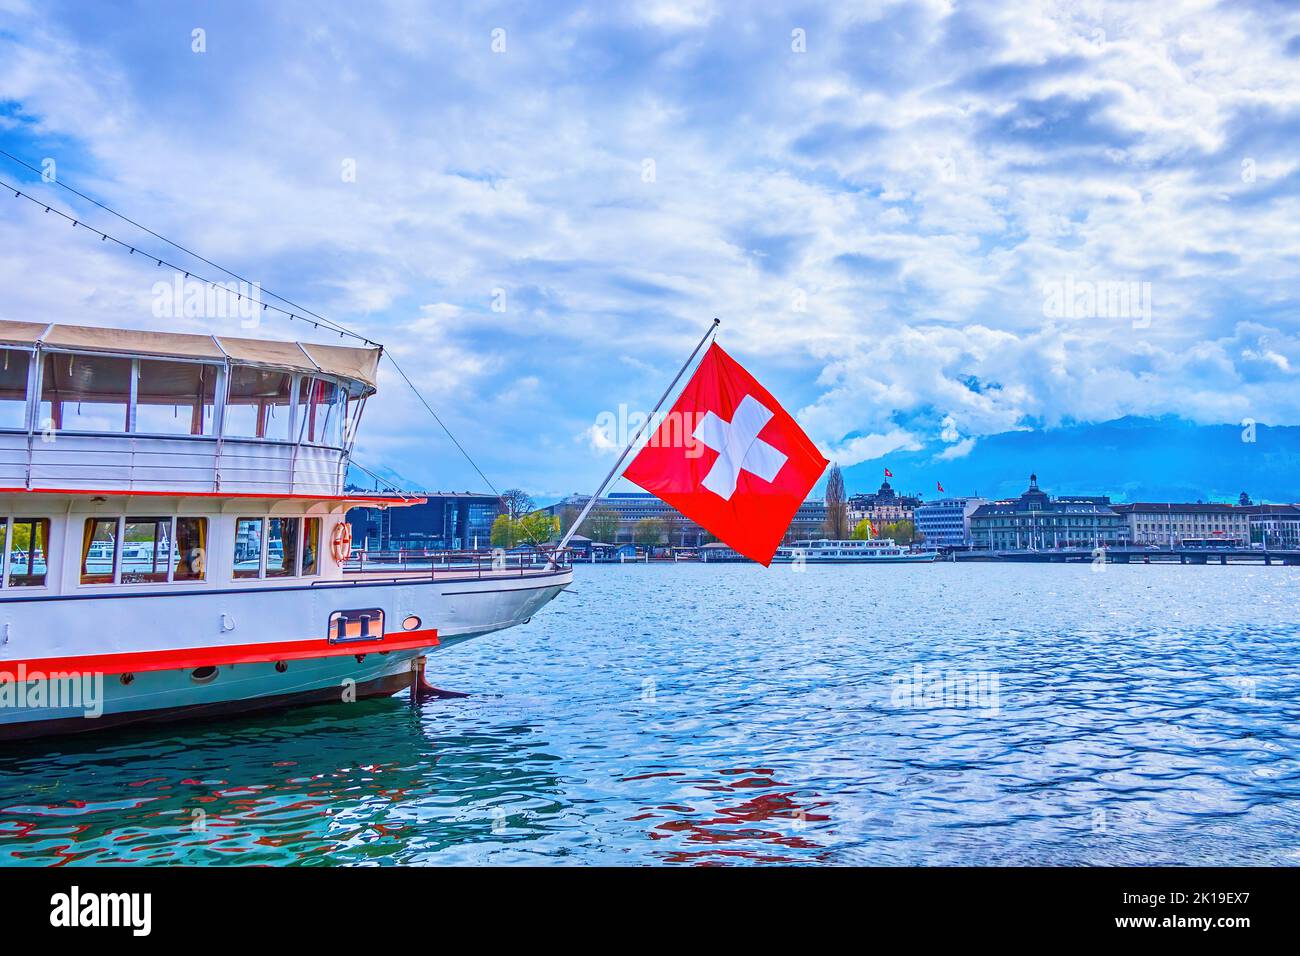 The huge Swiss flag on the boat, moored at the pier of Lucerne Lake, Lucerne, Switzerland Stock Photo